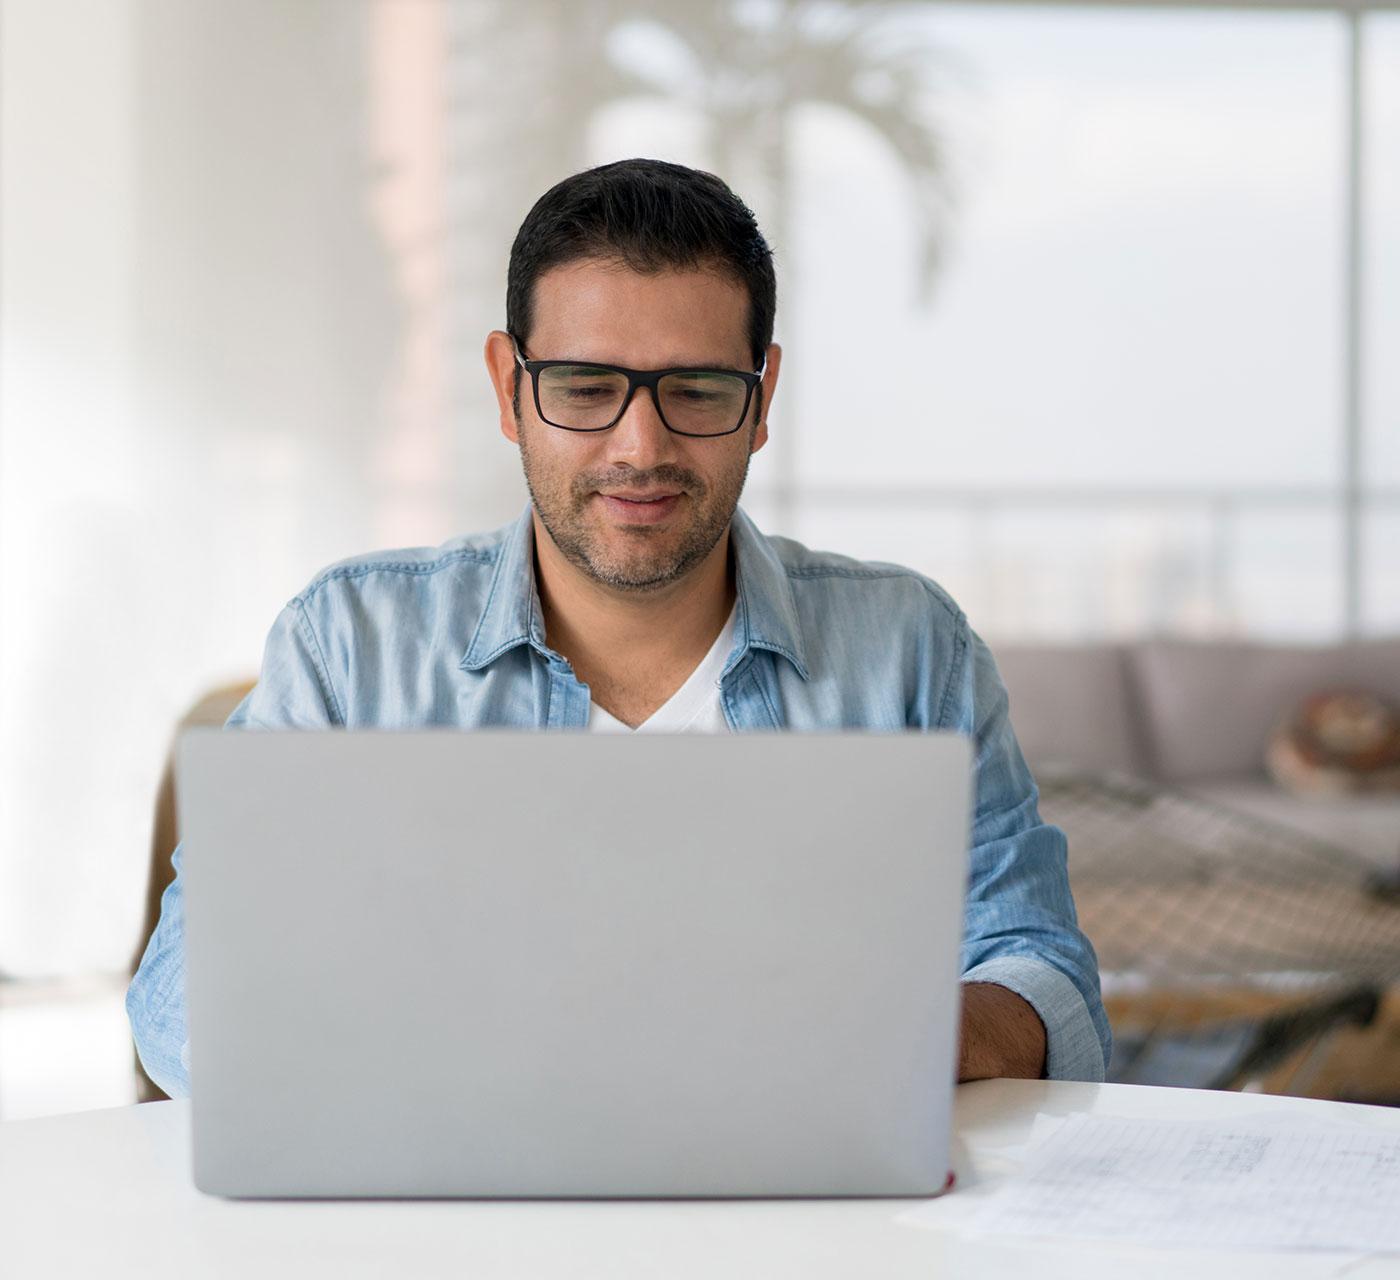 Adult man with glasses on a laptop 